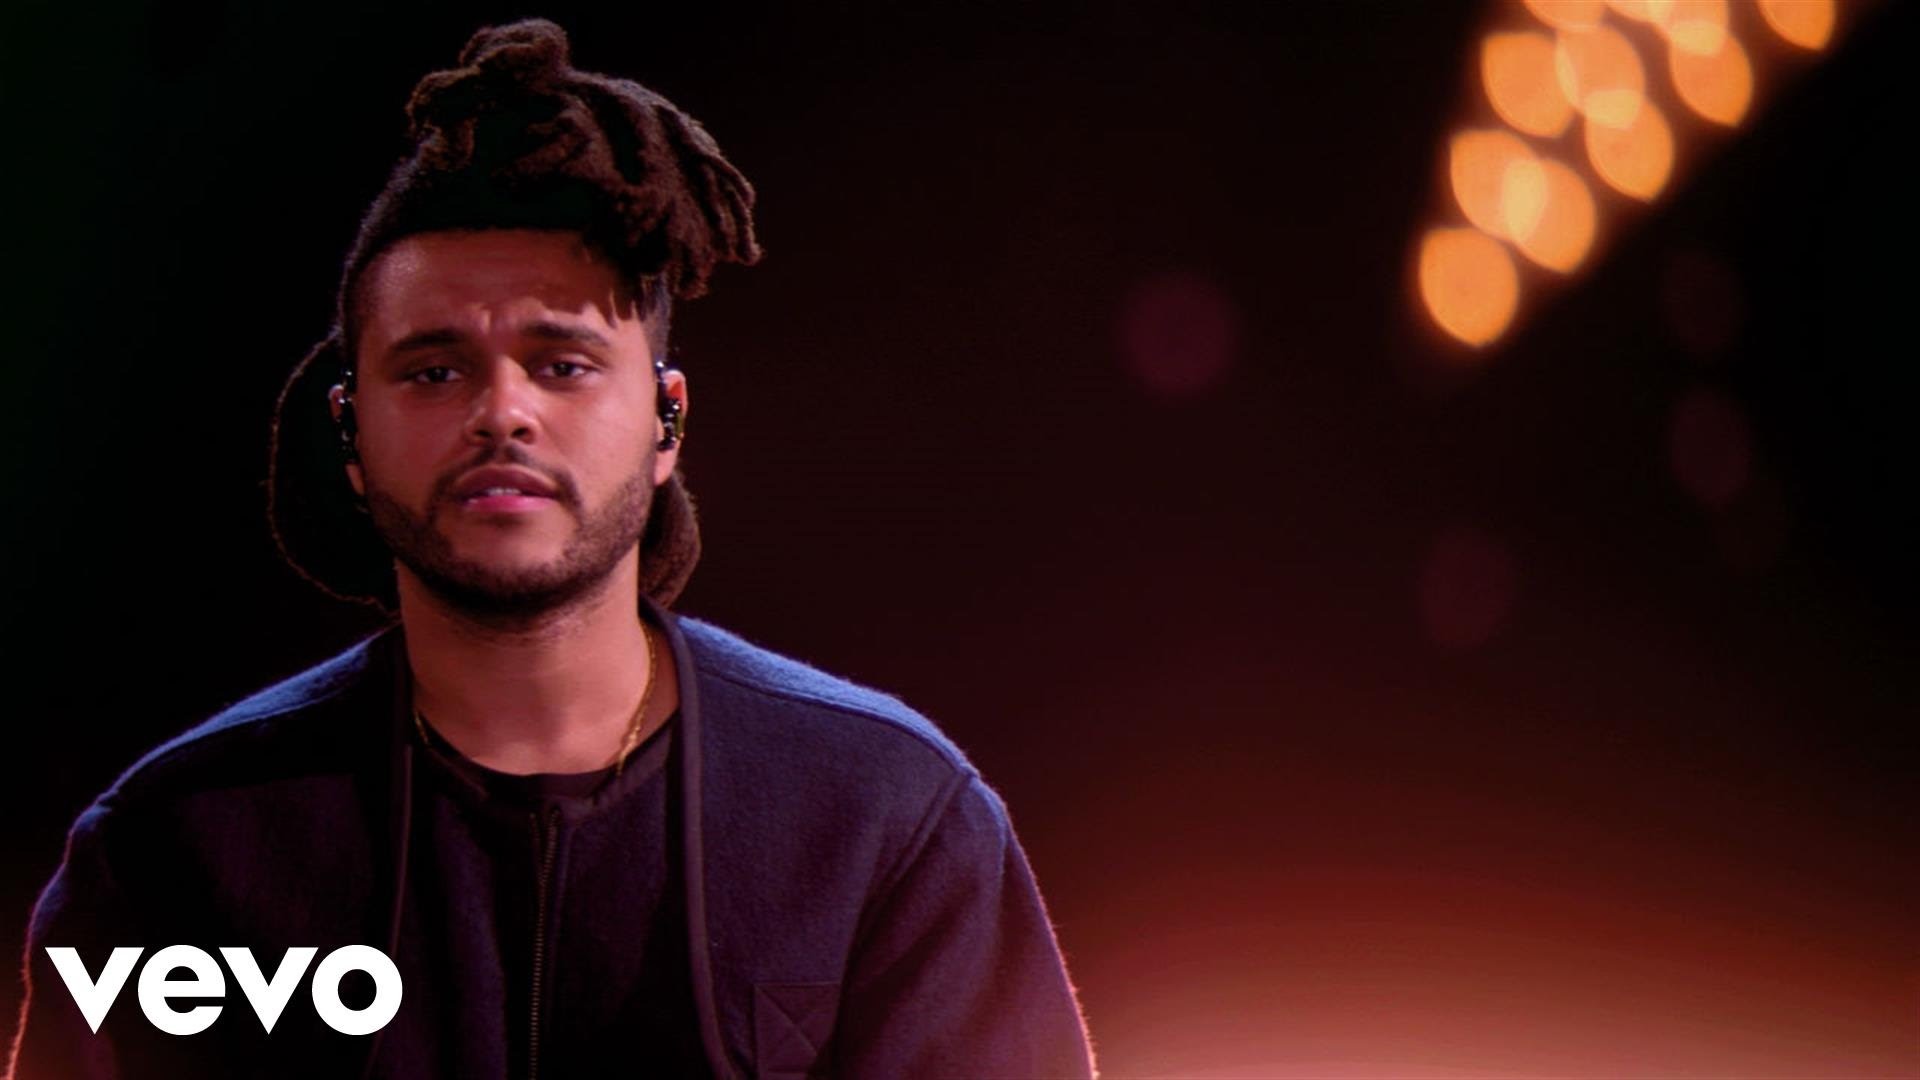 1920x1080 The Weeknd - Can't Feel My Face (Live From The Victoria's Secret 2015  Fashion Show) - YouTube